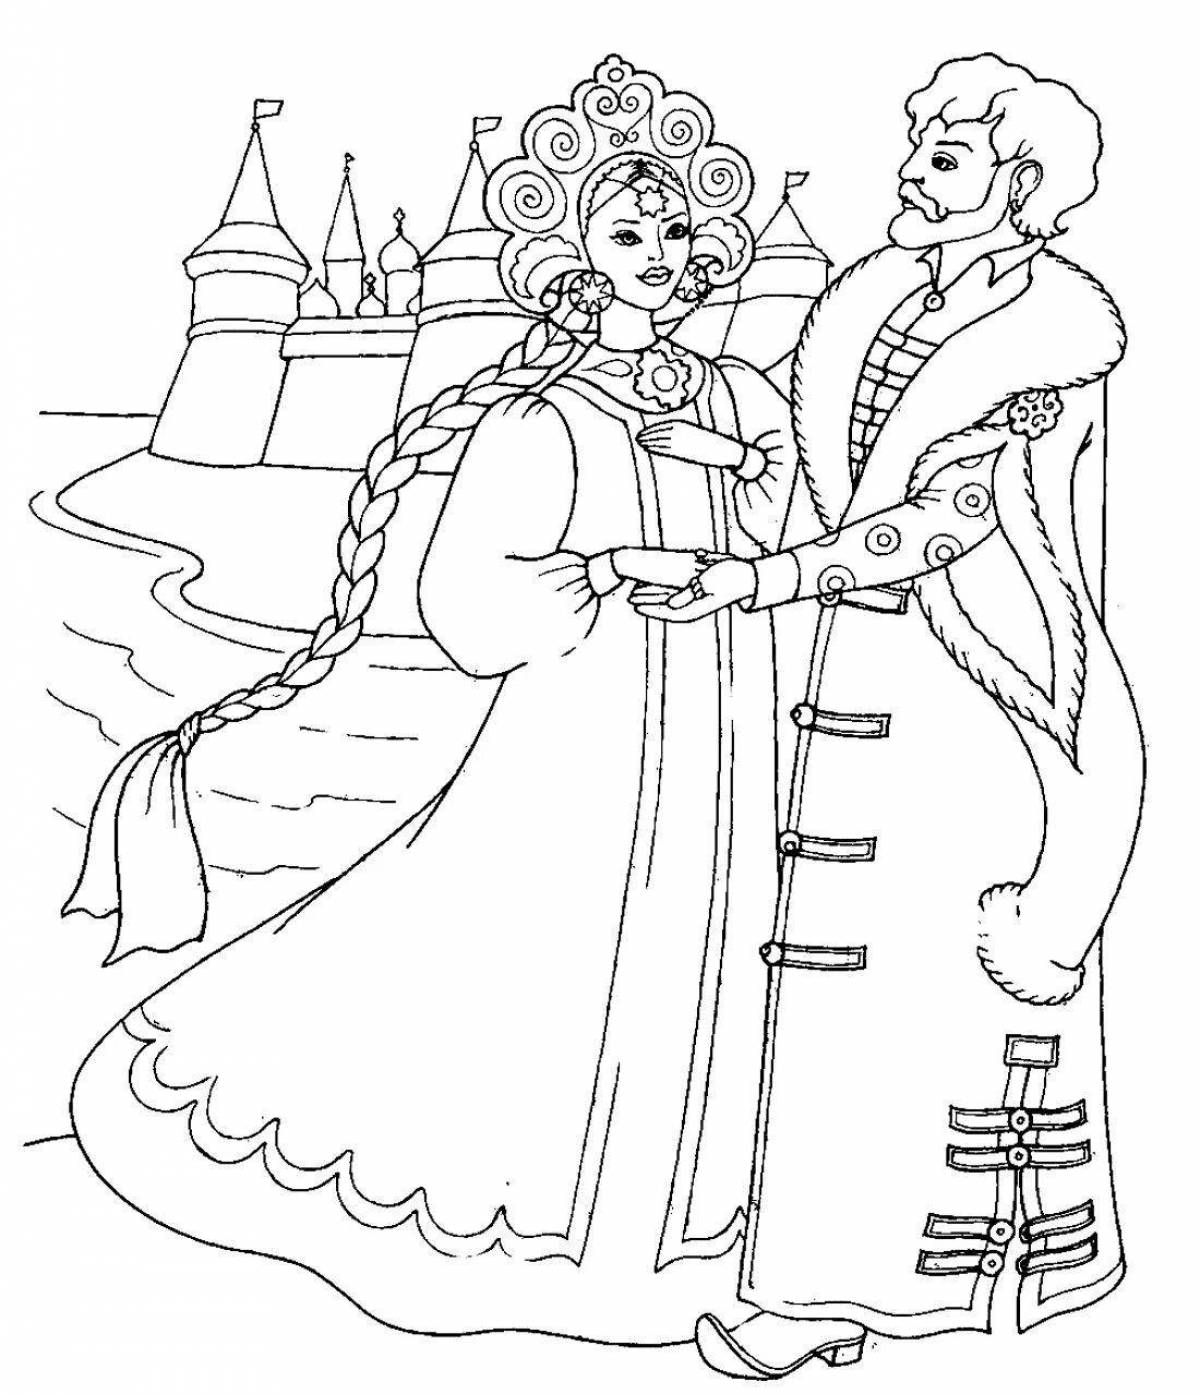 A funny coloring book based on Pushkin's fairy tales